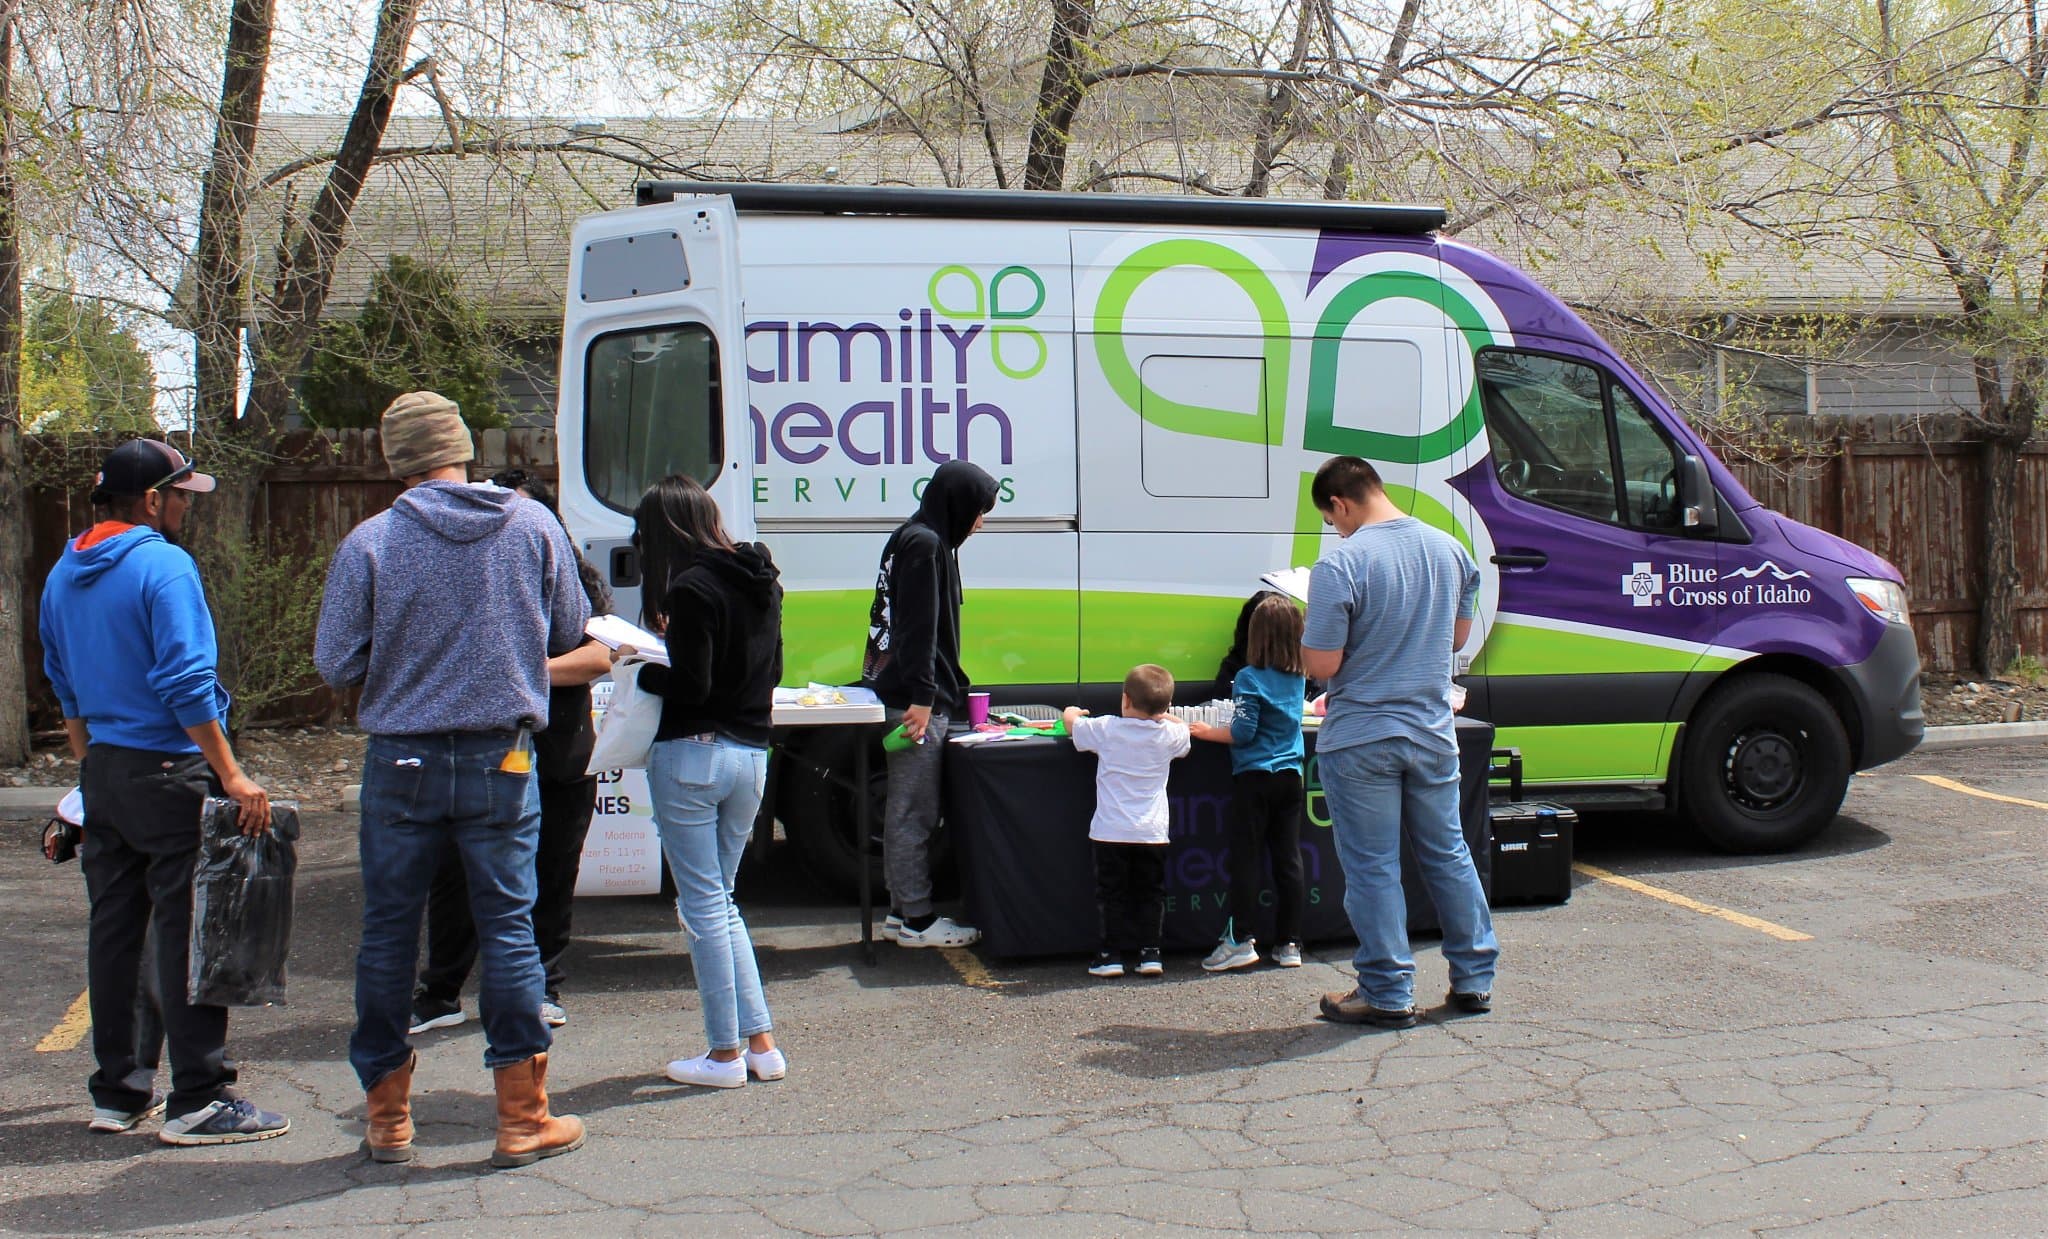 Featured image for “Family Health Services Provides Mobile Health Care”